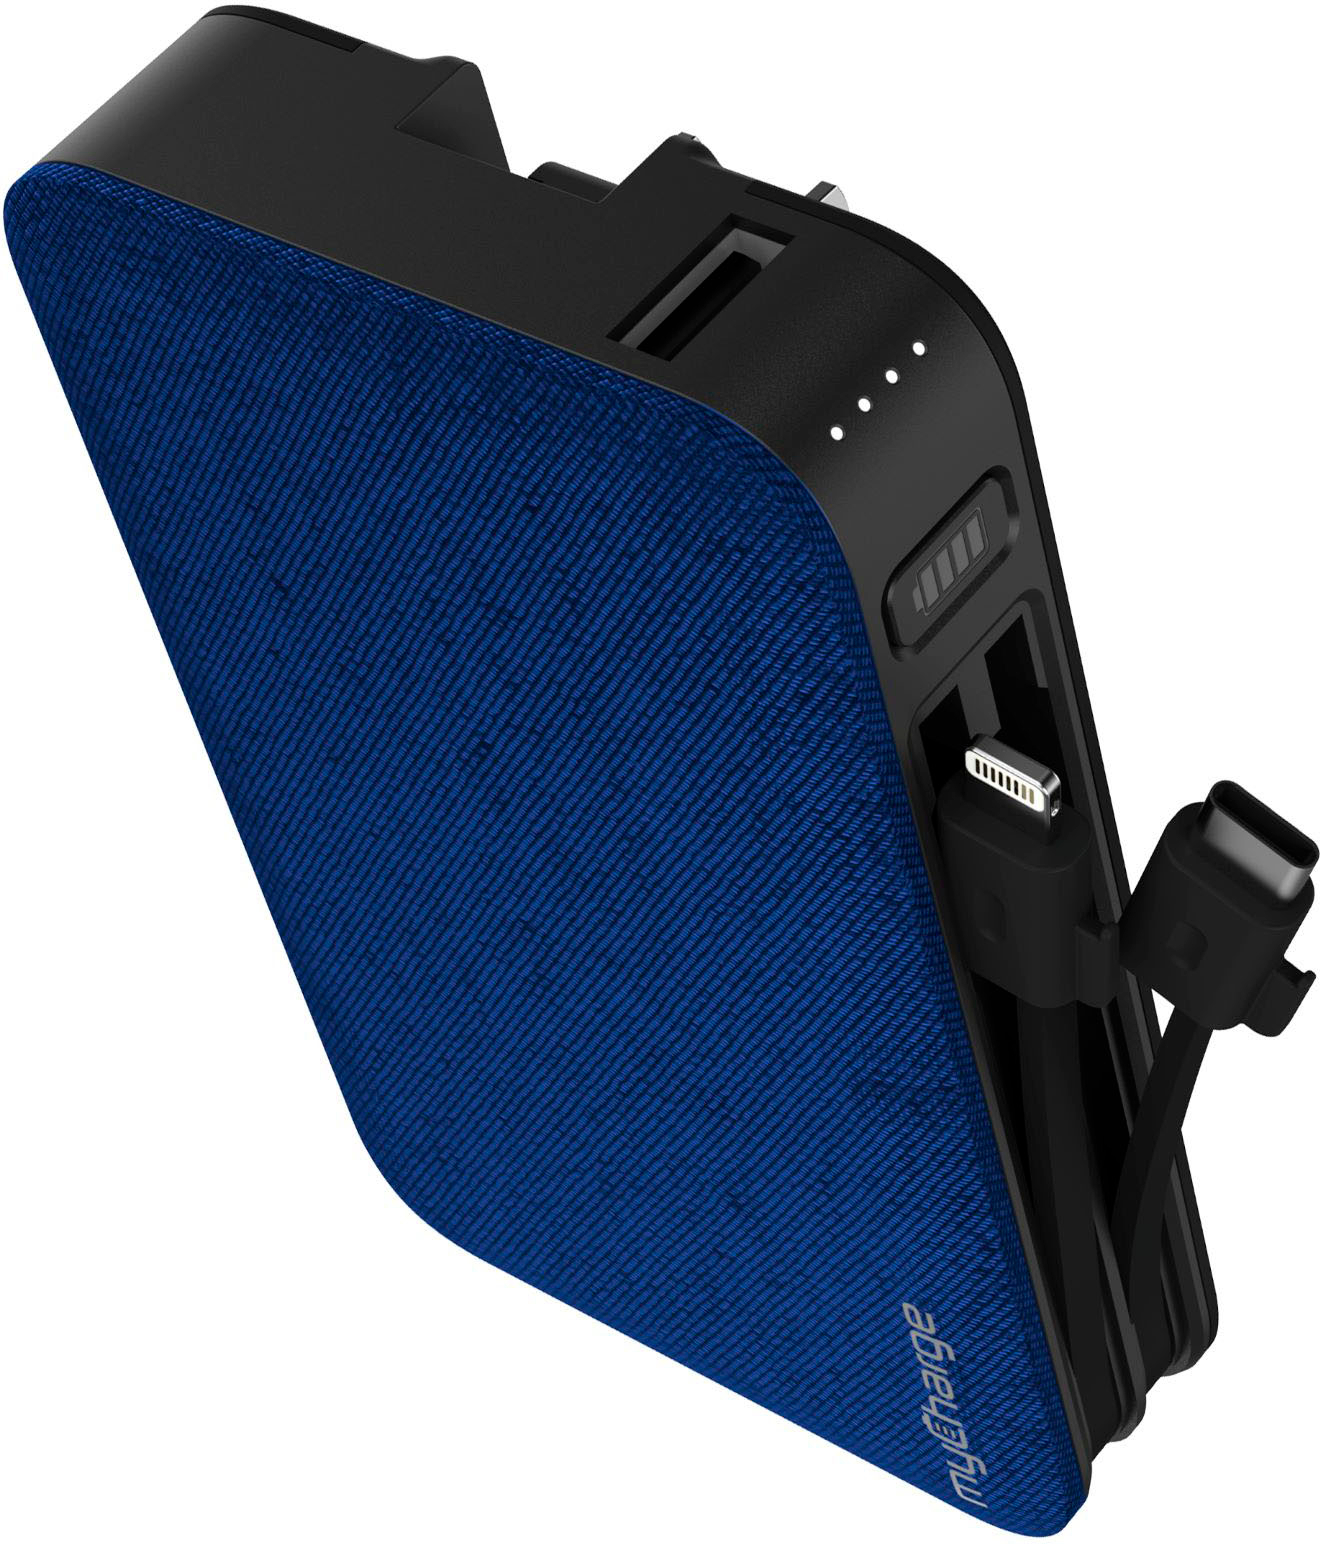 Angle View: myCharge - POWERCENTER 6000 mAh Portable Charge for Most Mobile Devices - Blue/Black